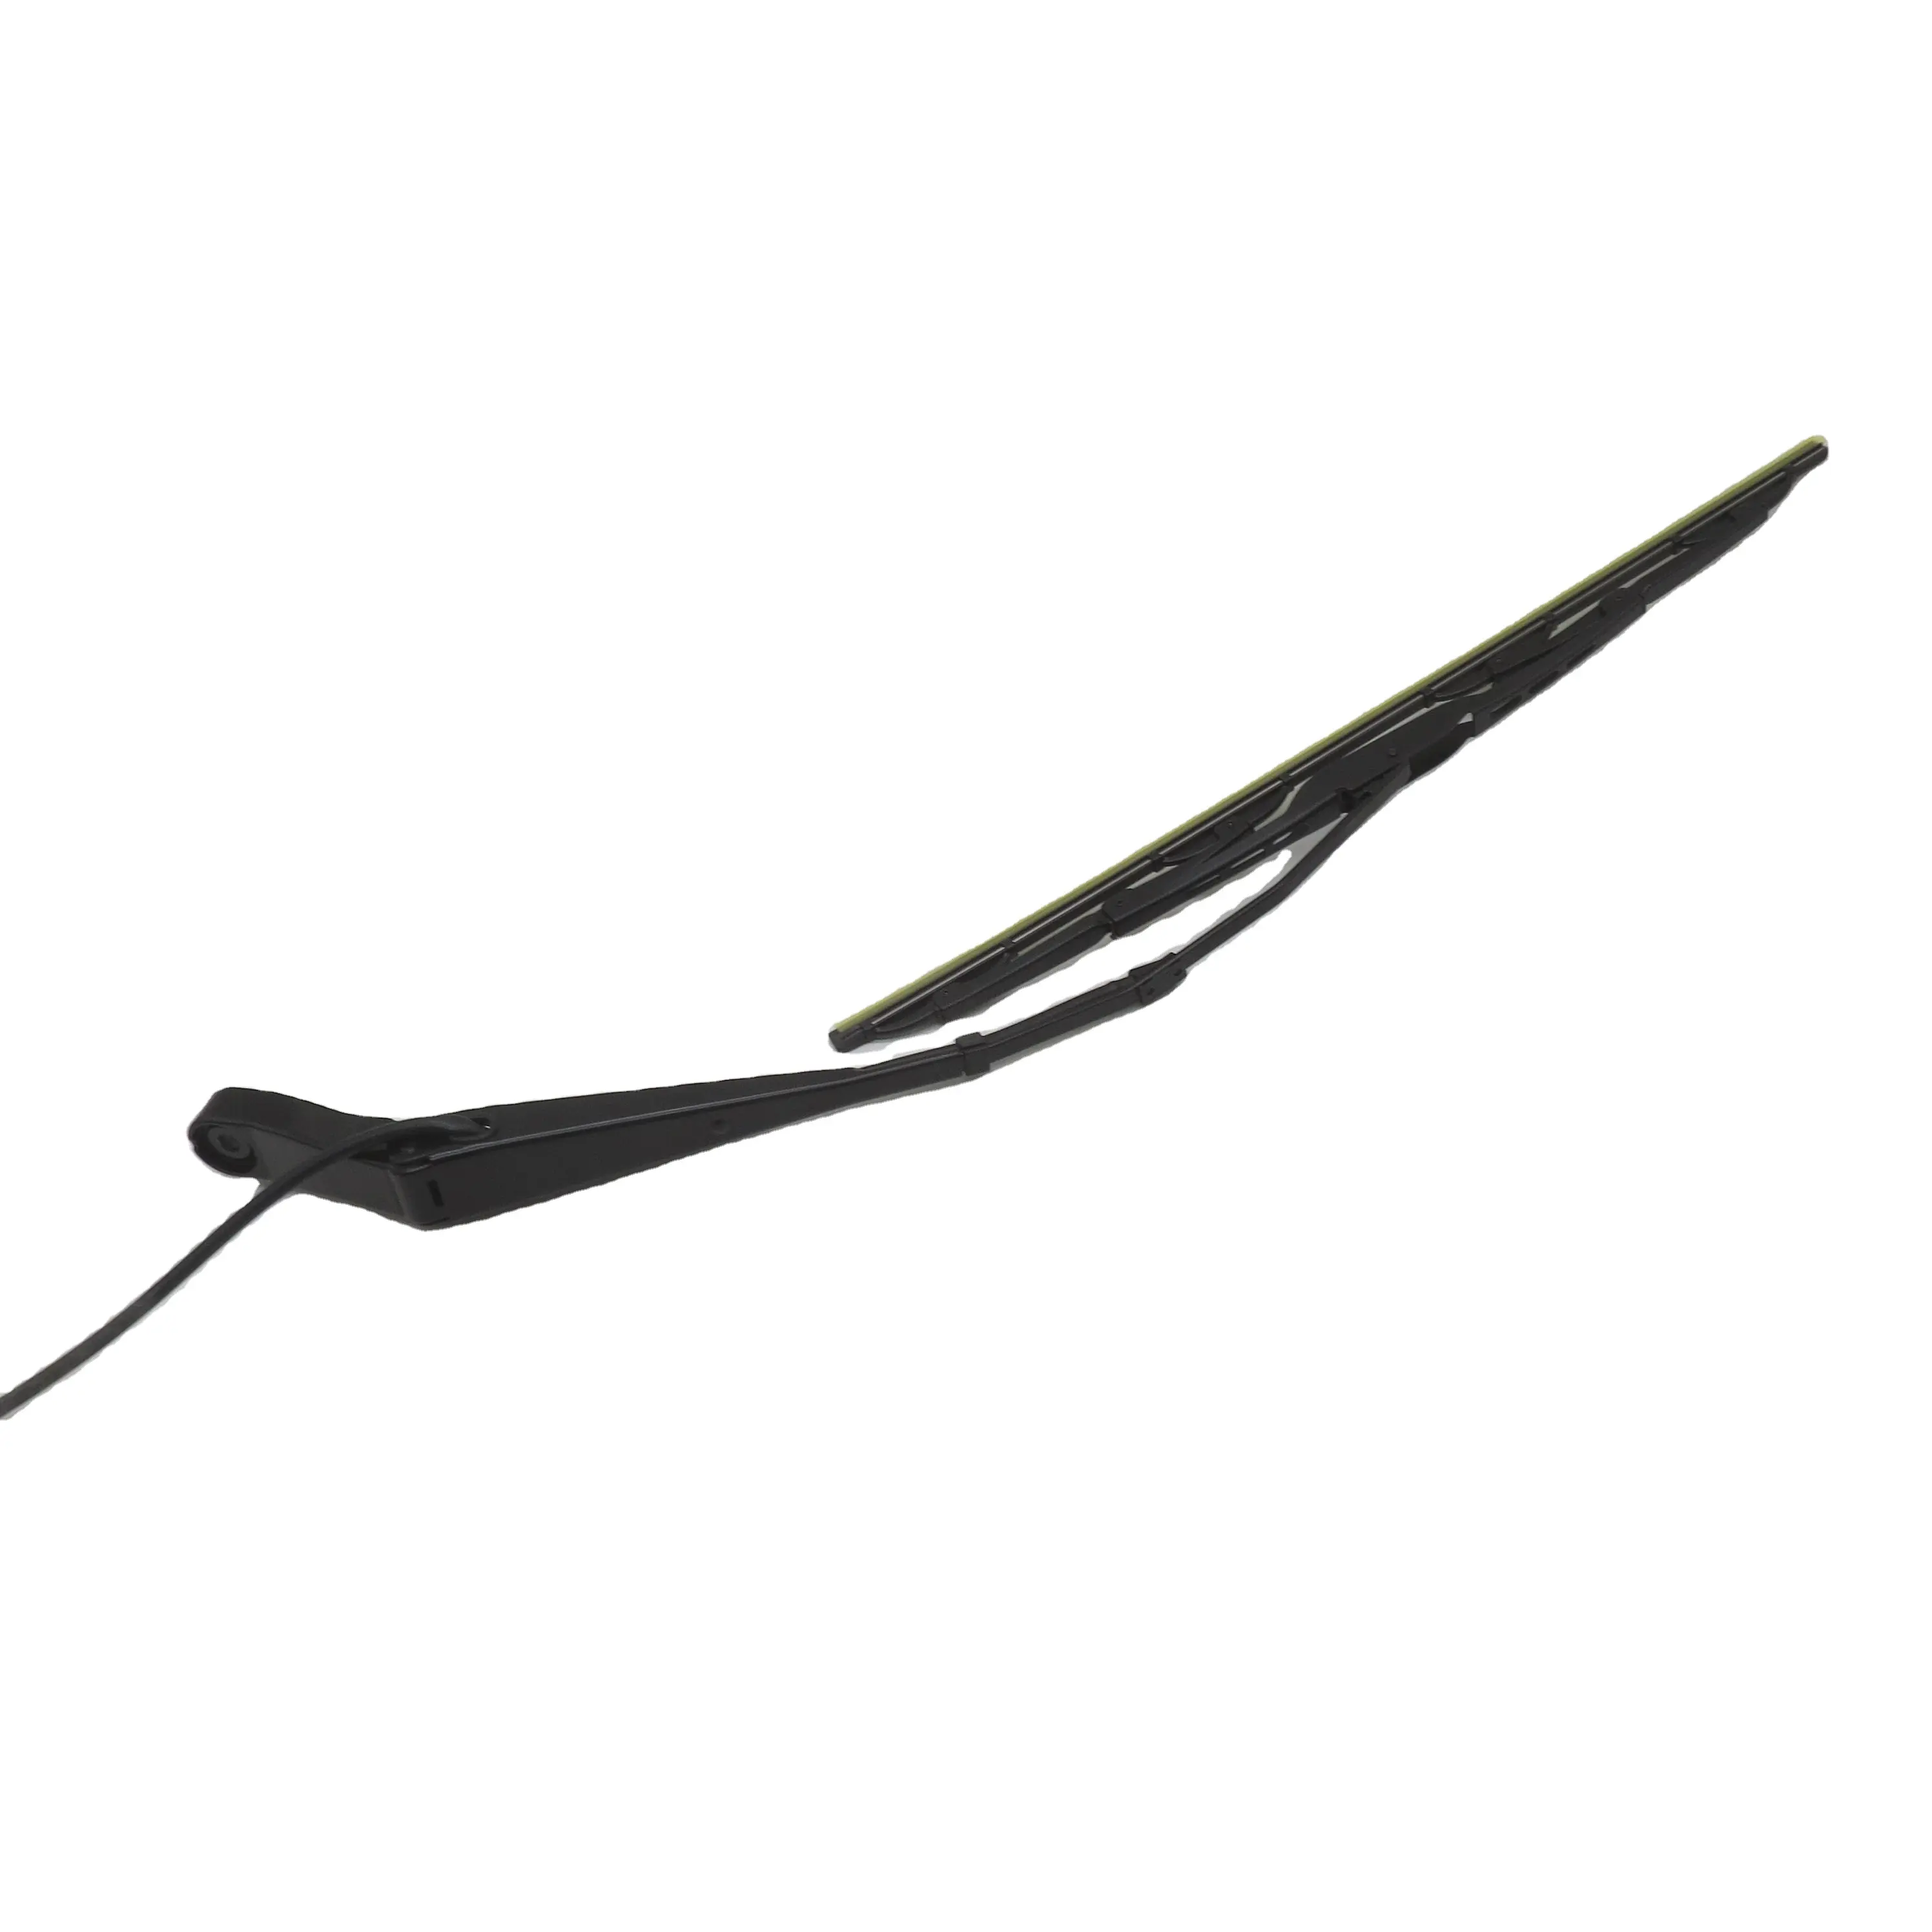 Hot Selling Wiper Blade Conventional Wiper Blade For Wholesales Wiper Blade